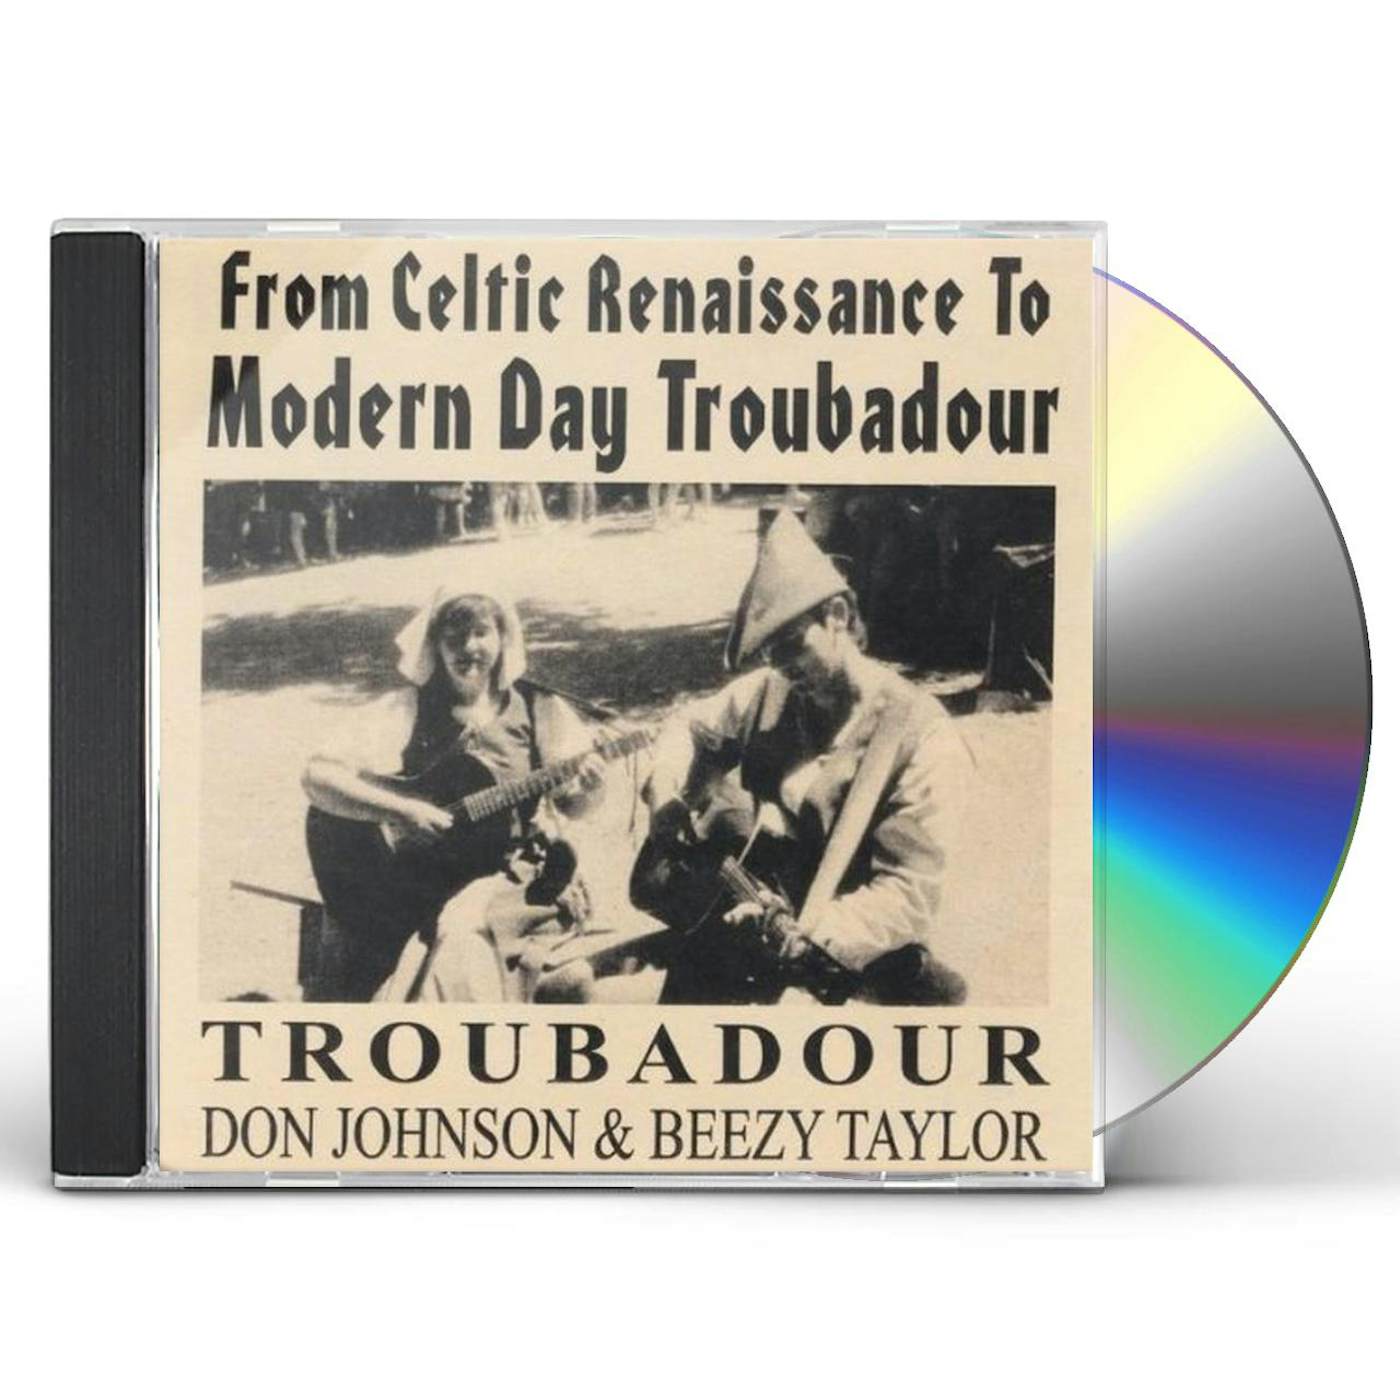 FROM CELTIC RENAISSANCE TO MODERN DAY TROUBADOUR CD